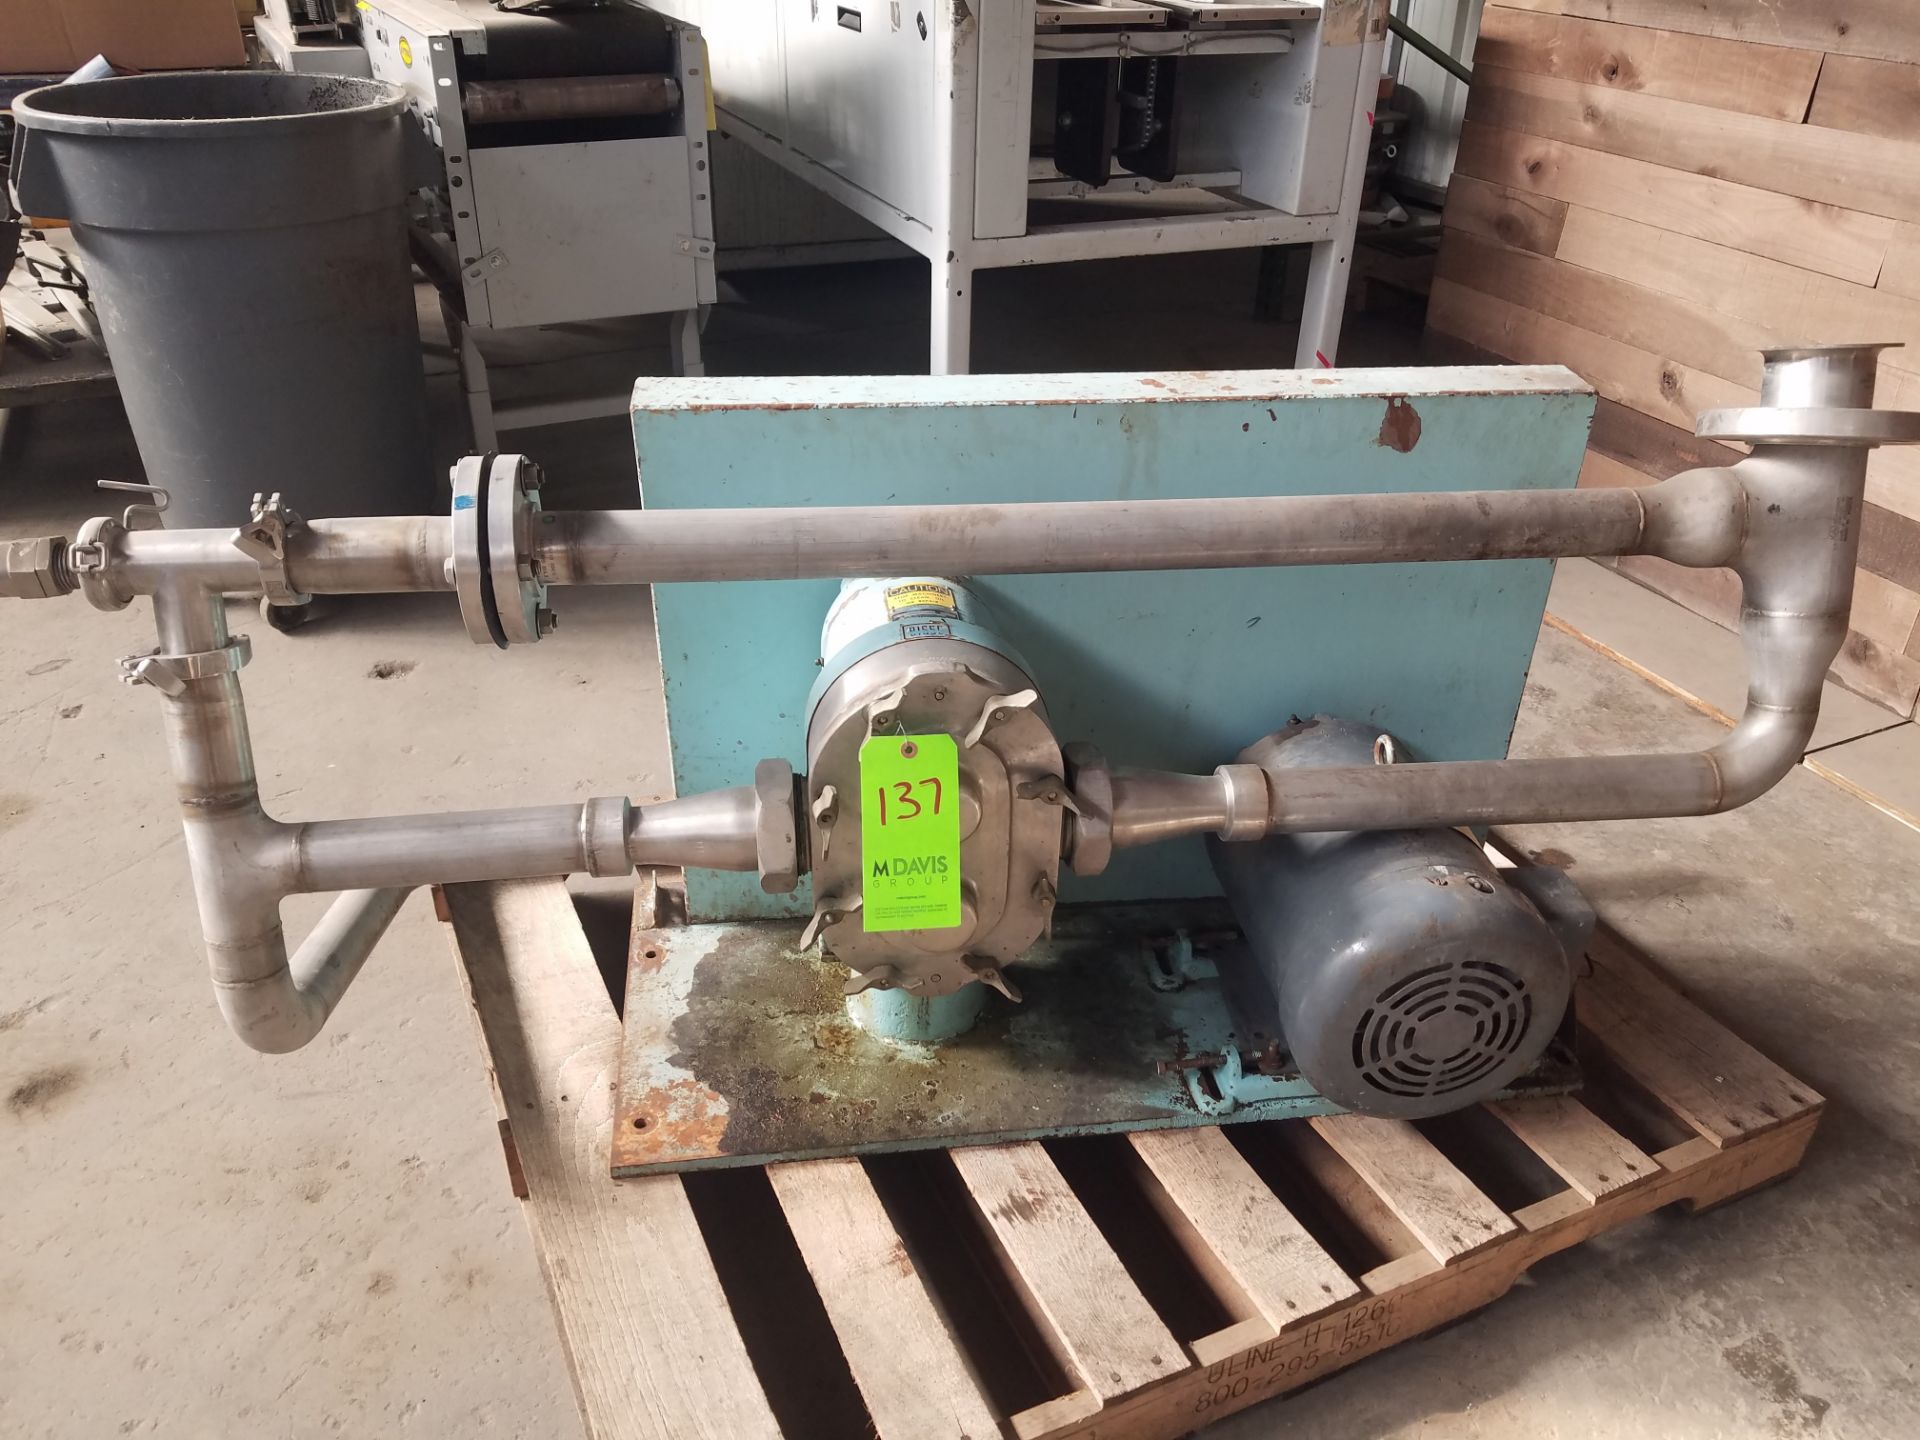 Waukesha 2 hp S/S Pump, Size 55, Volt 230, Single Phase (Rigging, Loading & Site Management Fee